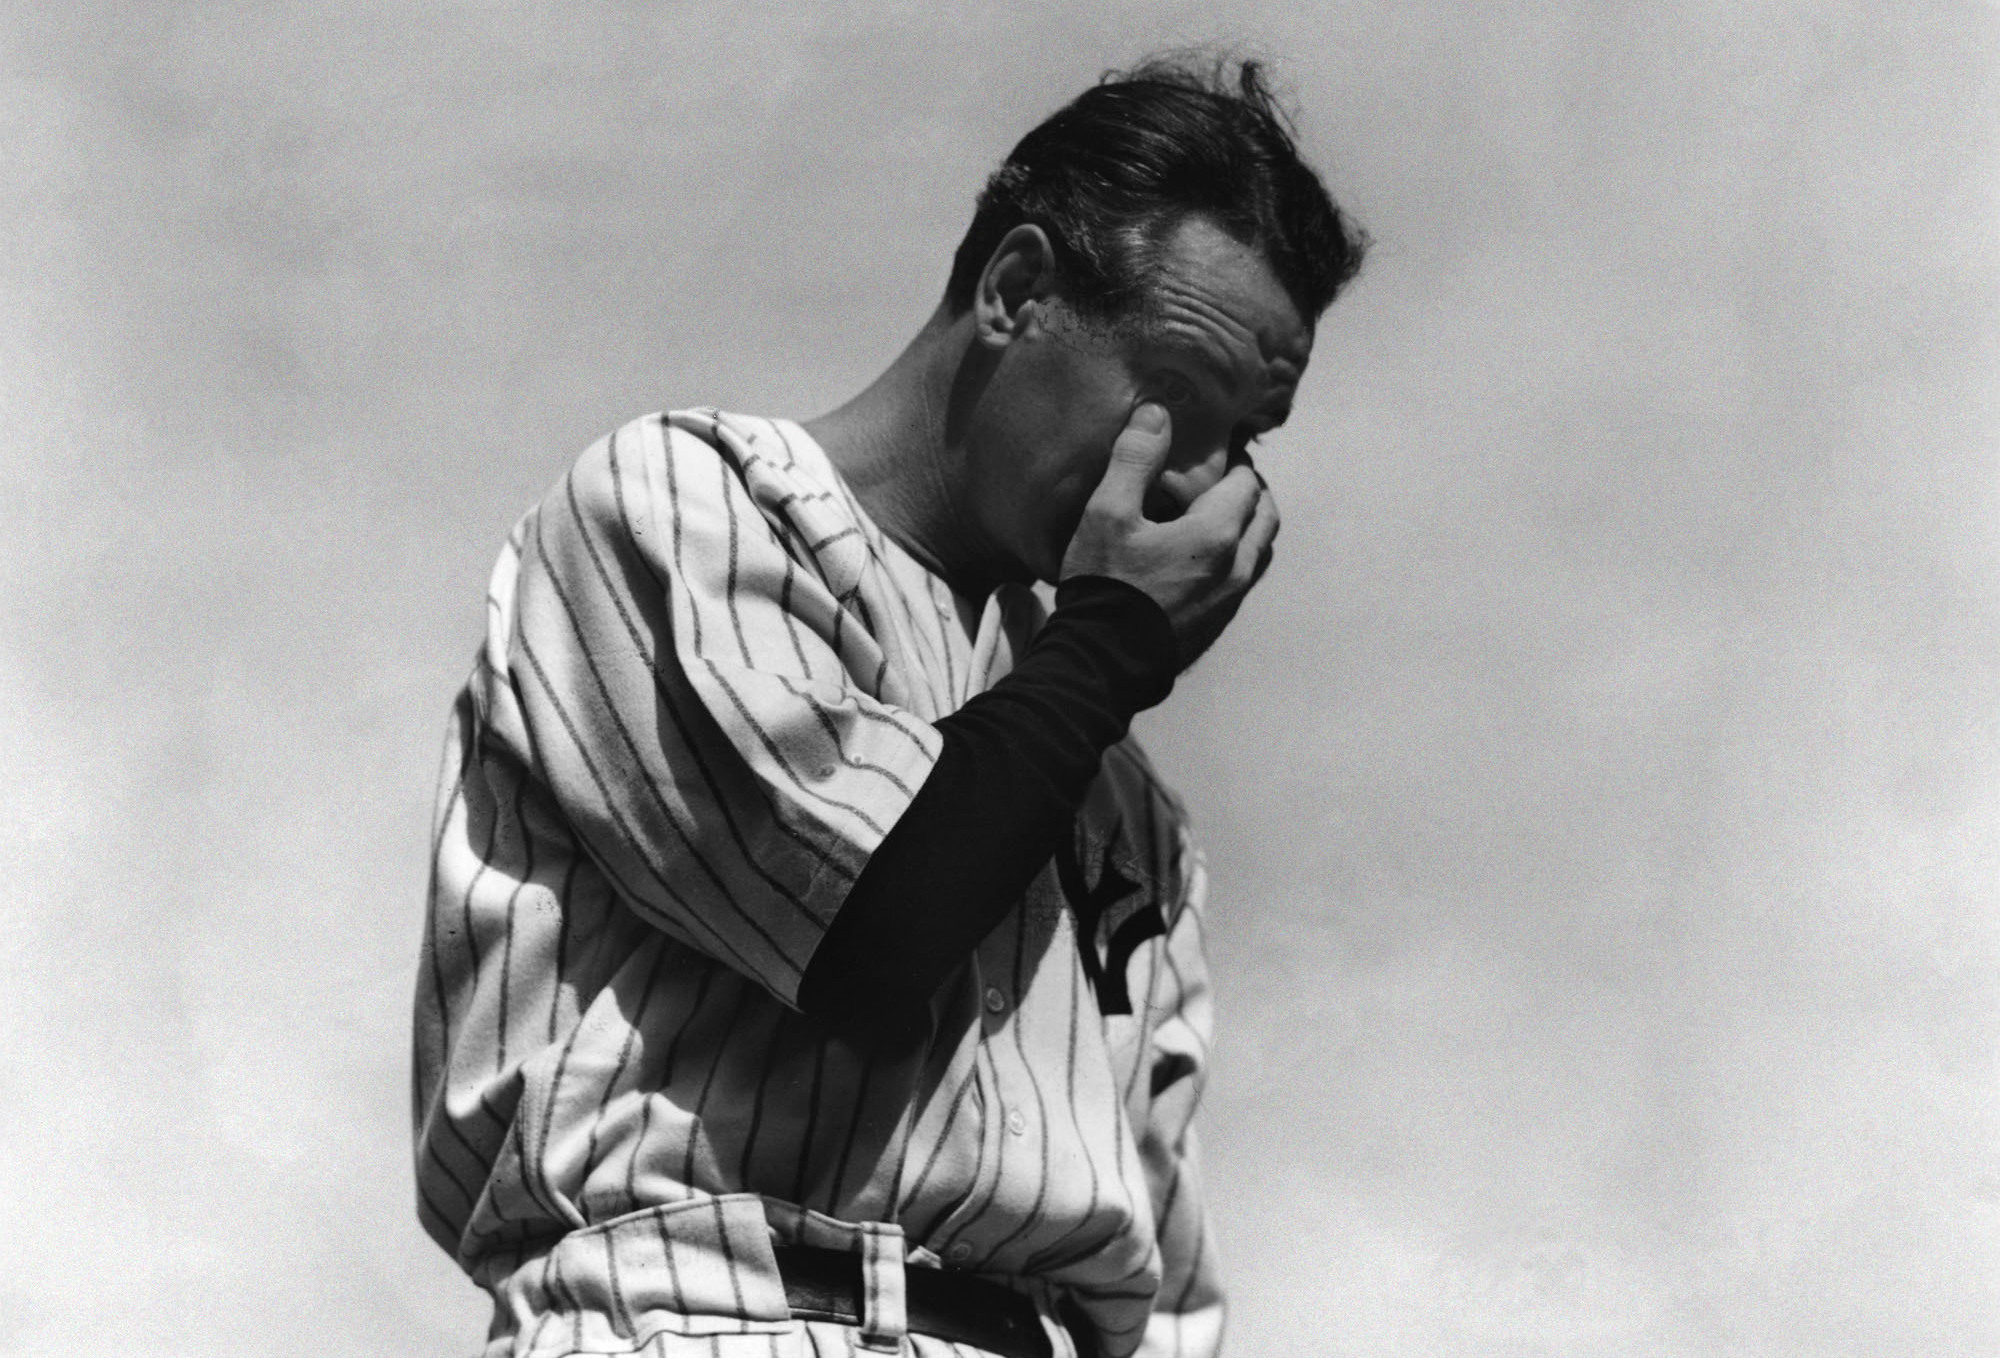 Lou Gehrig Is The New York Yankees' First Honored Legend